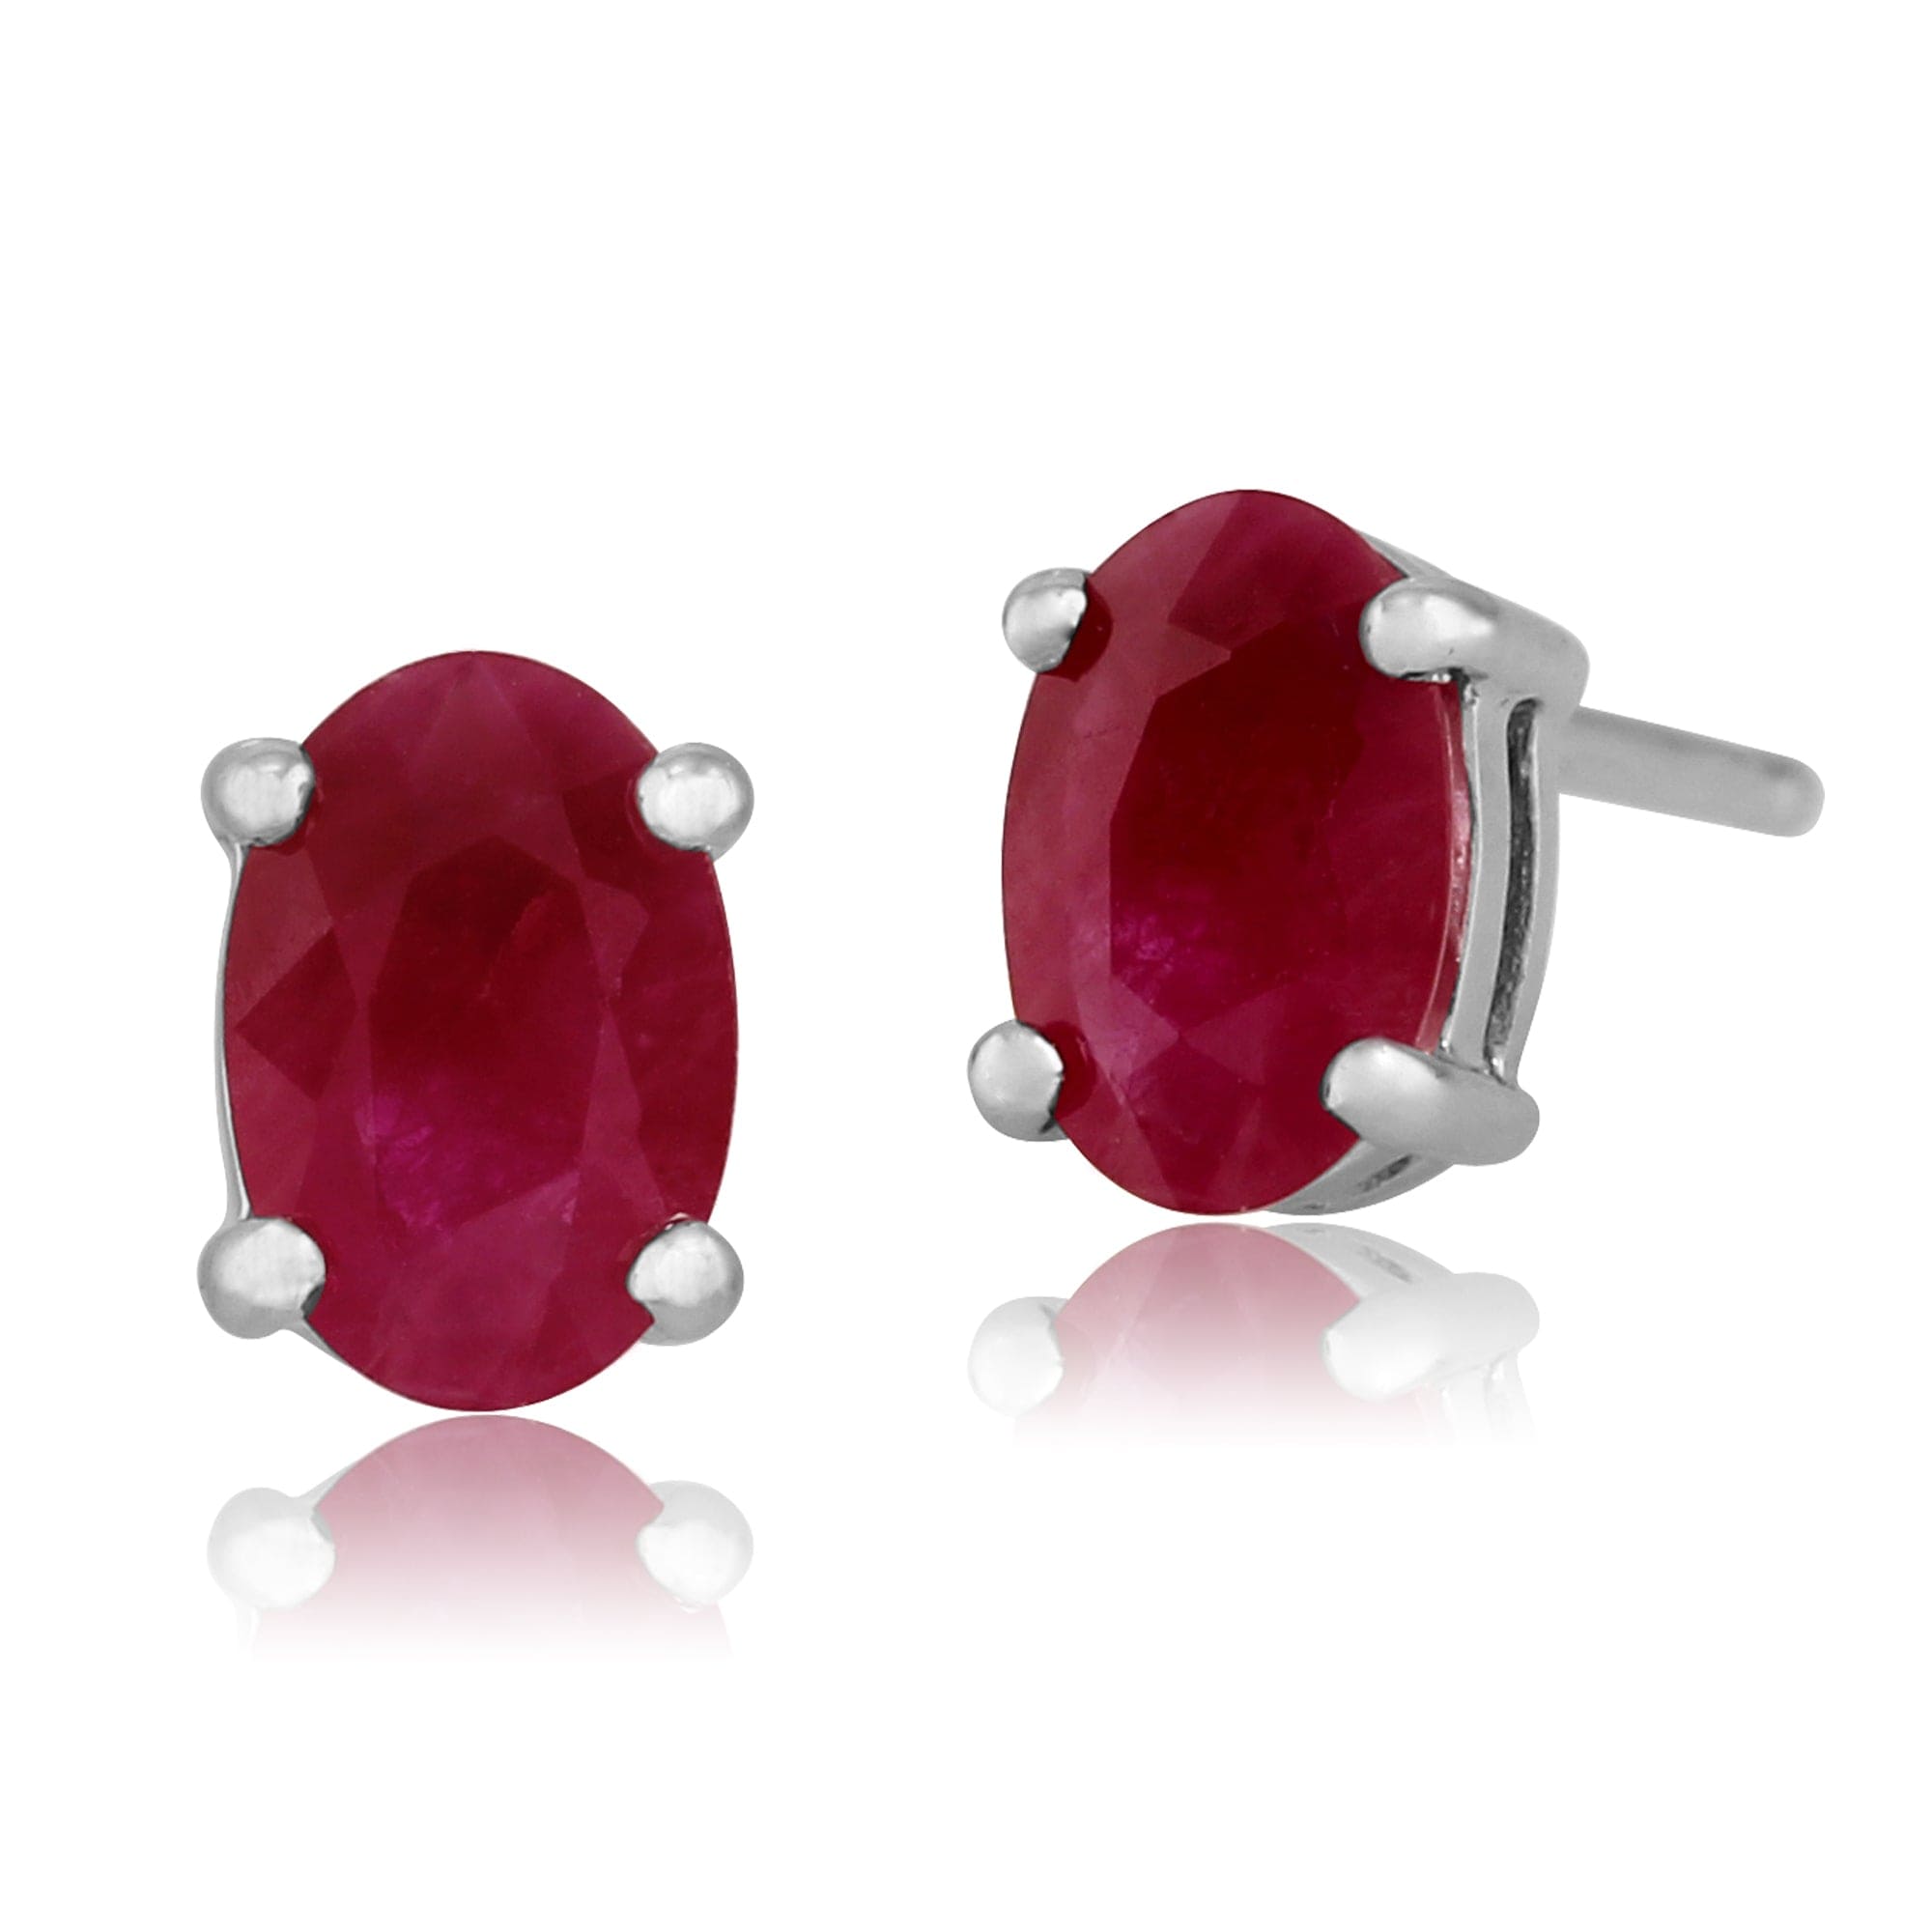 Classic Oval Ruby Stud Earrings in 9ct White Gold 6x4mm - Gemondo